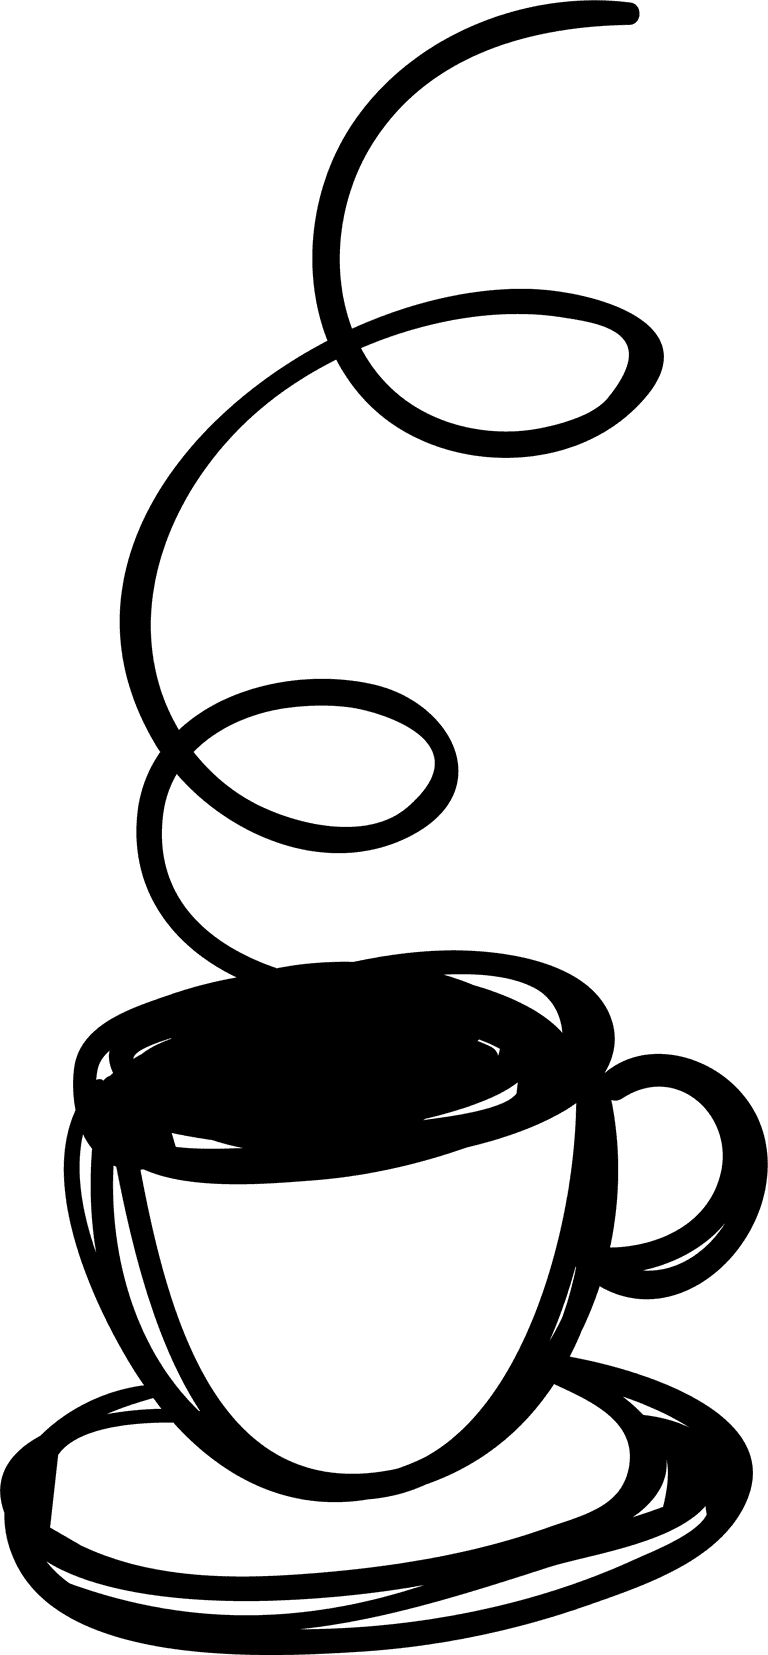 cup of tea pot icons black white handdrawn sketch